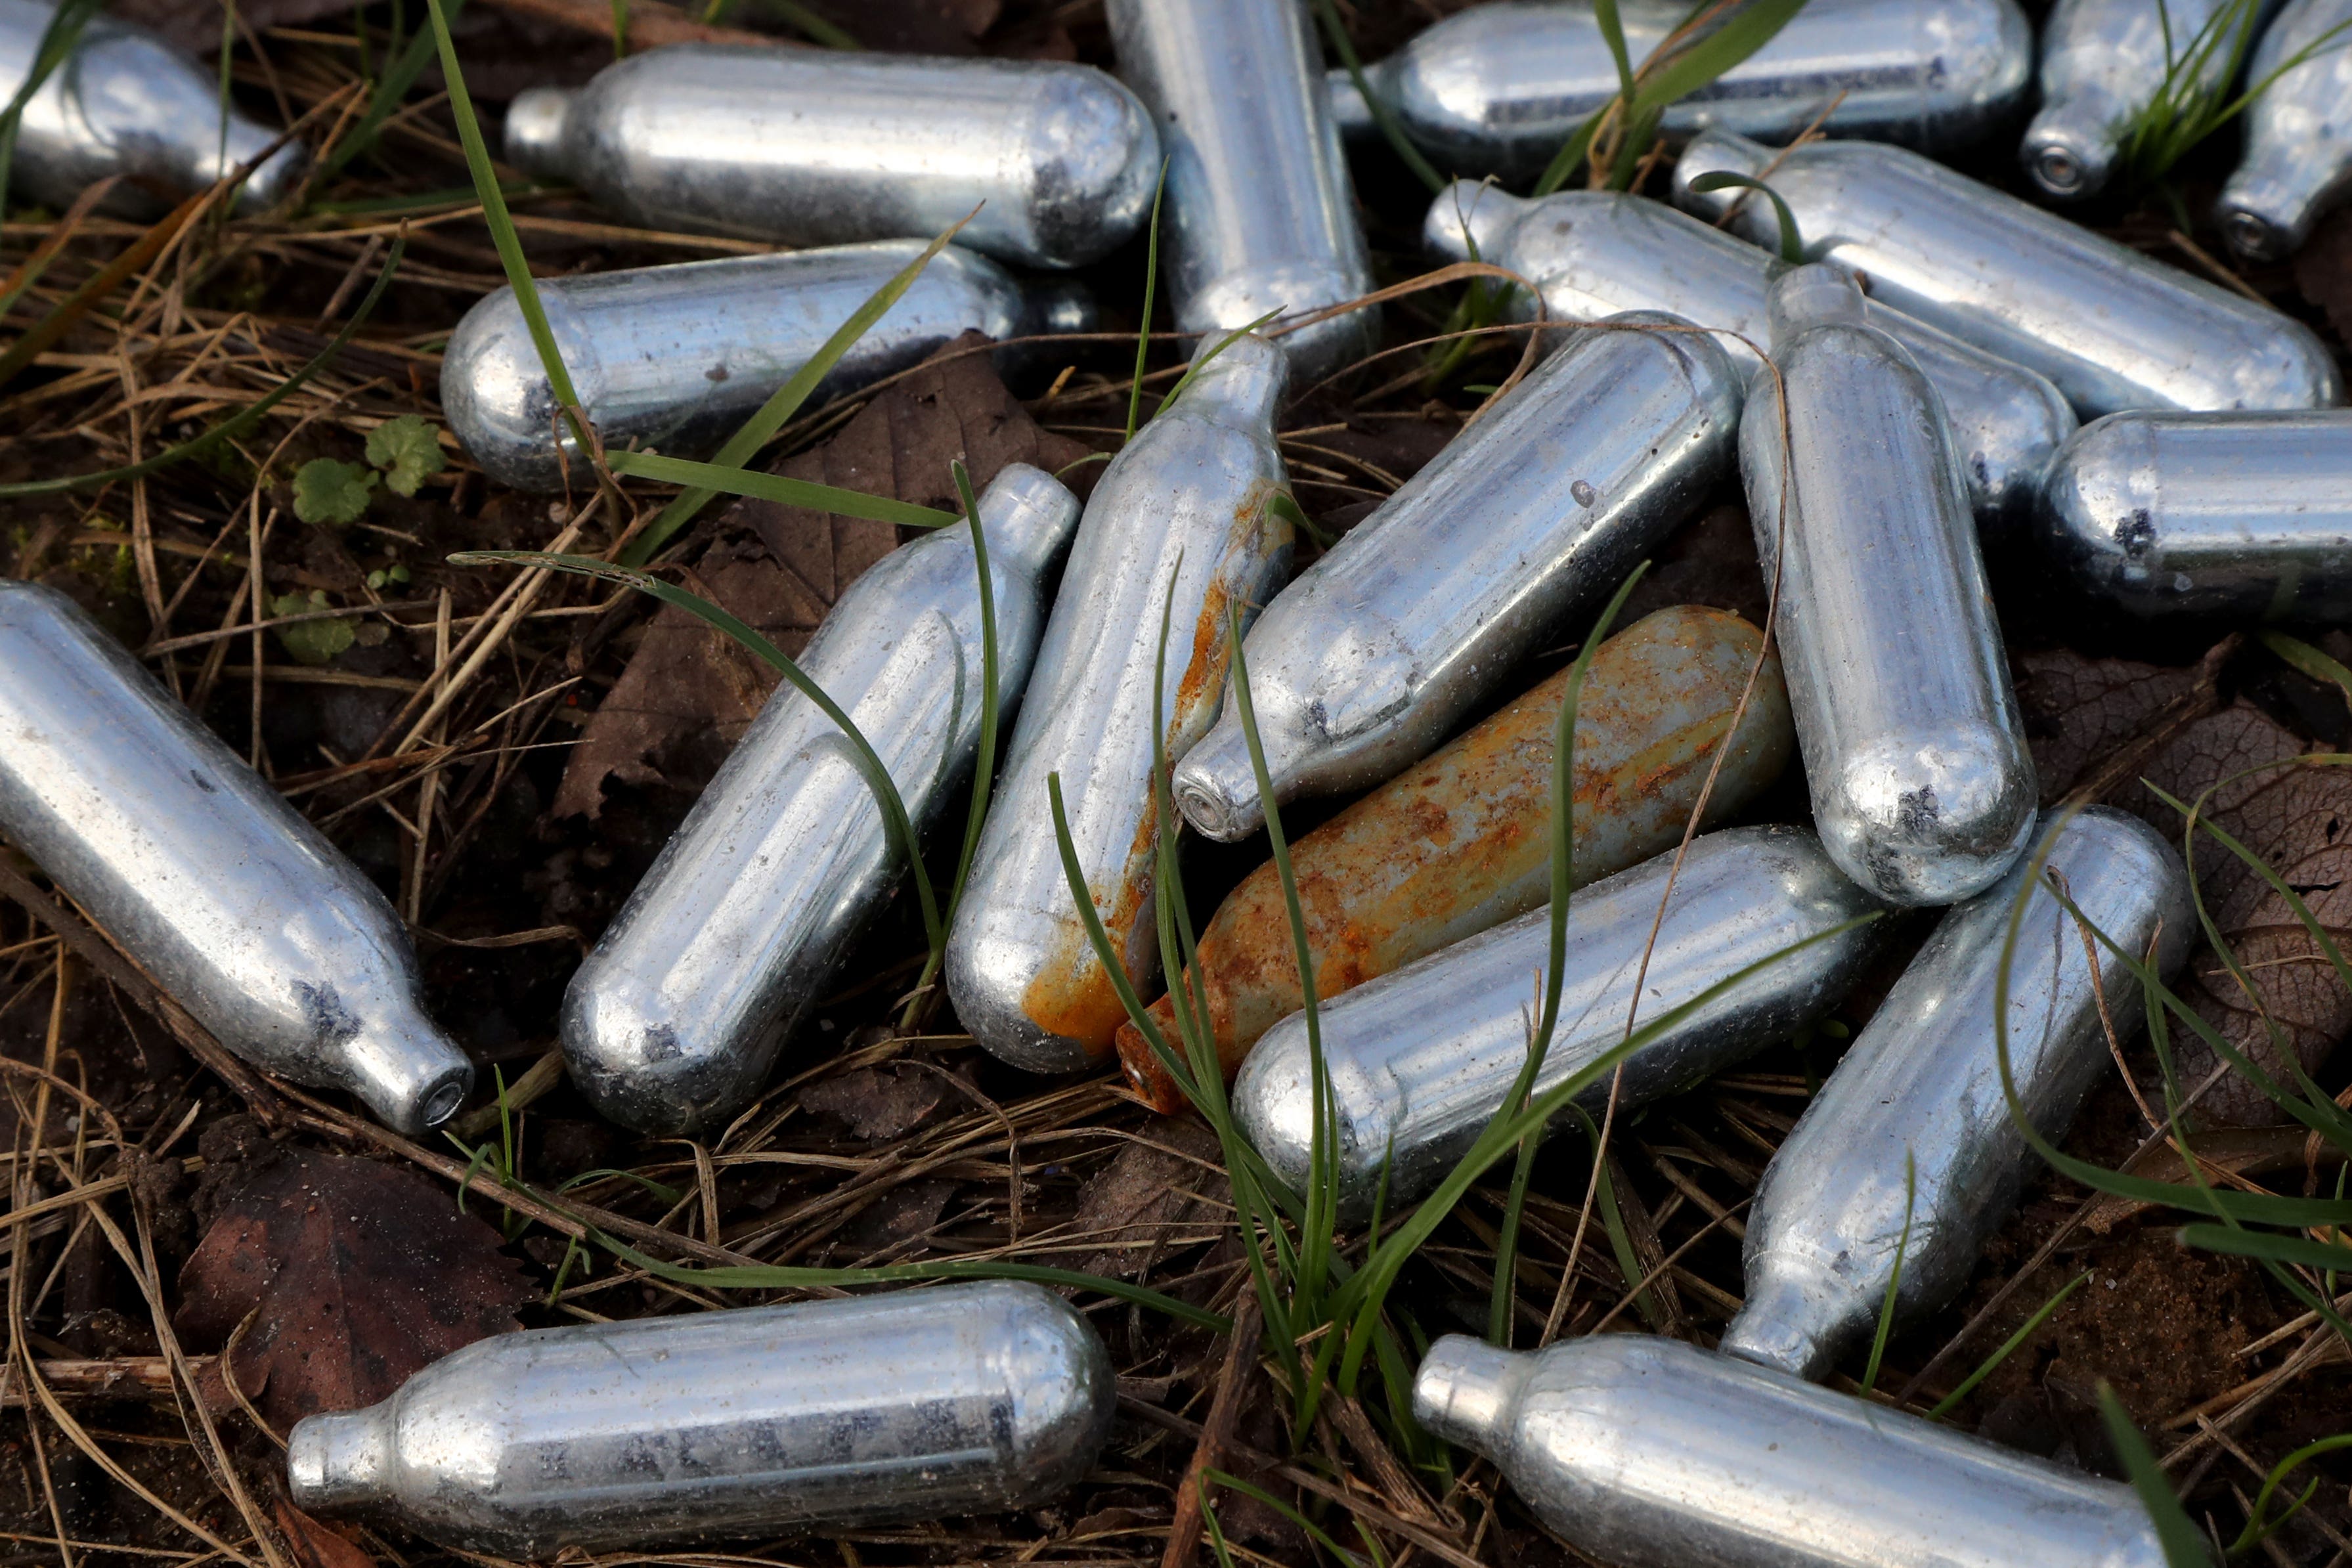 Beyond the health risks that nitrous oxide poses, there is the more visible and widespread problem of littering by discarded canisters